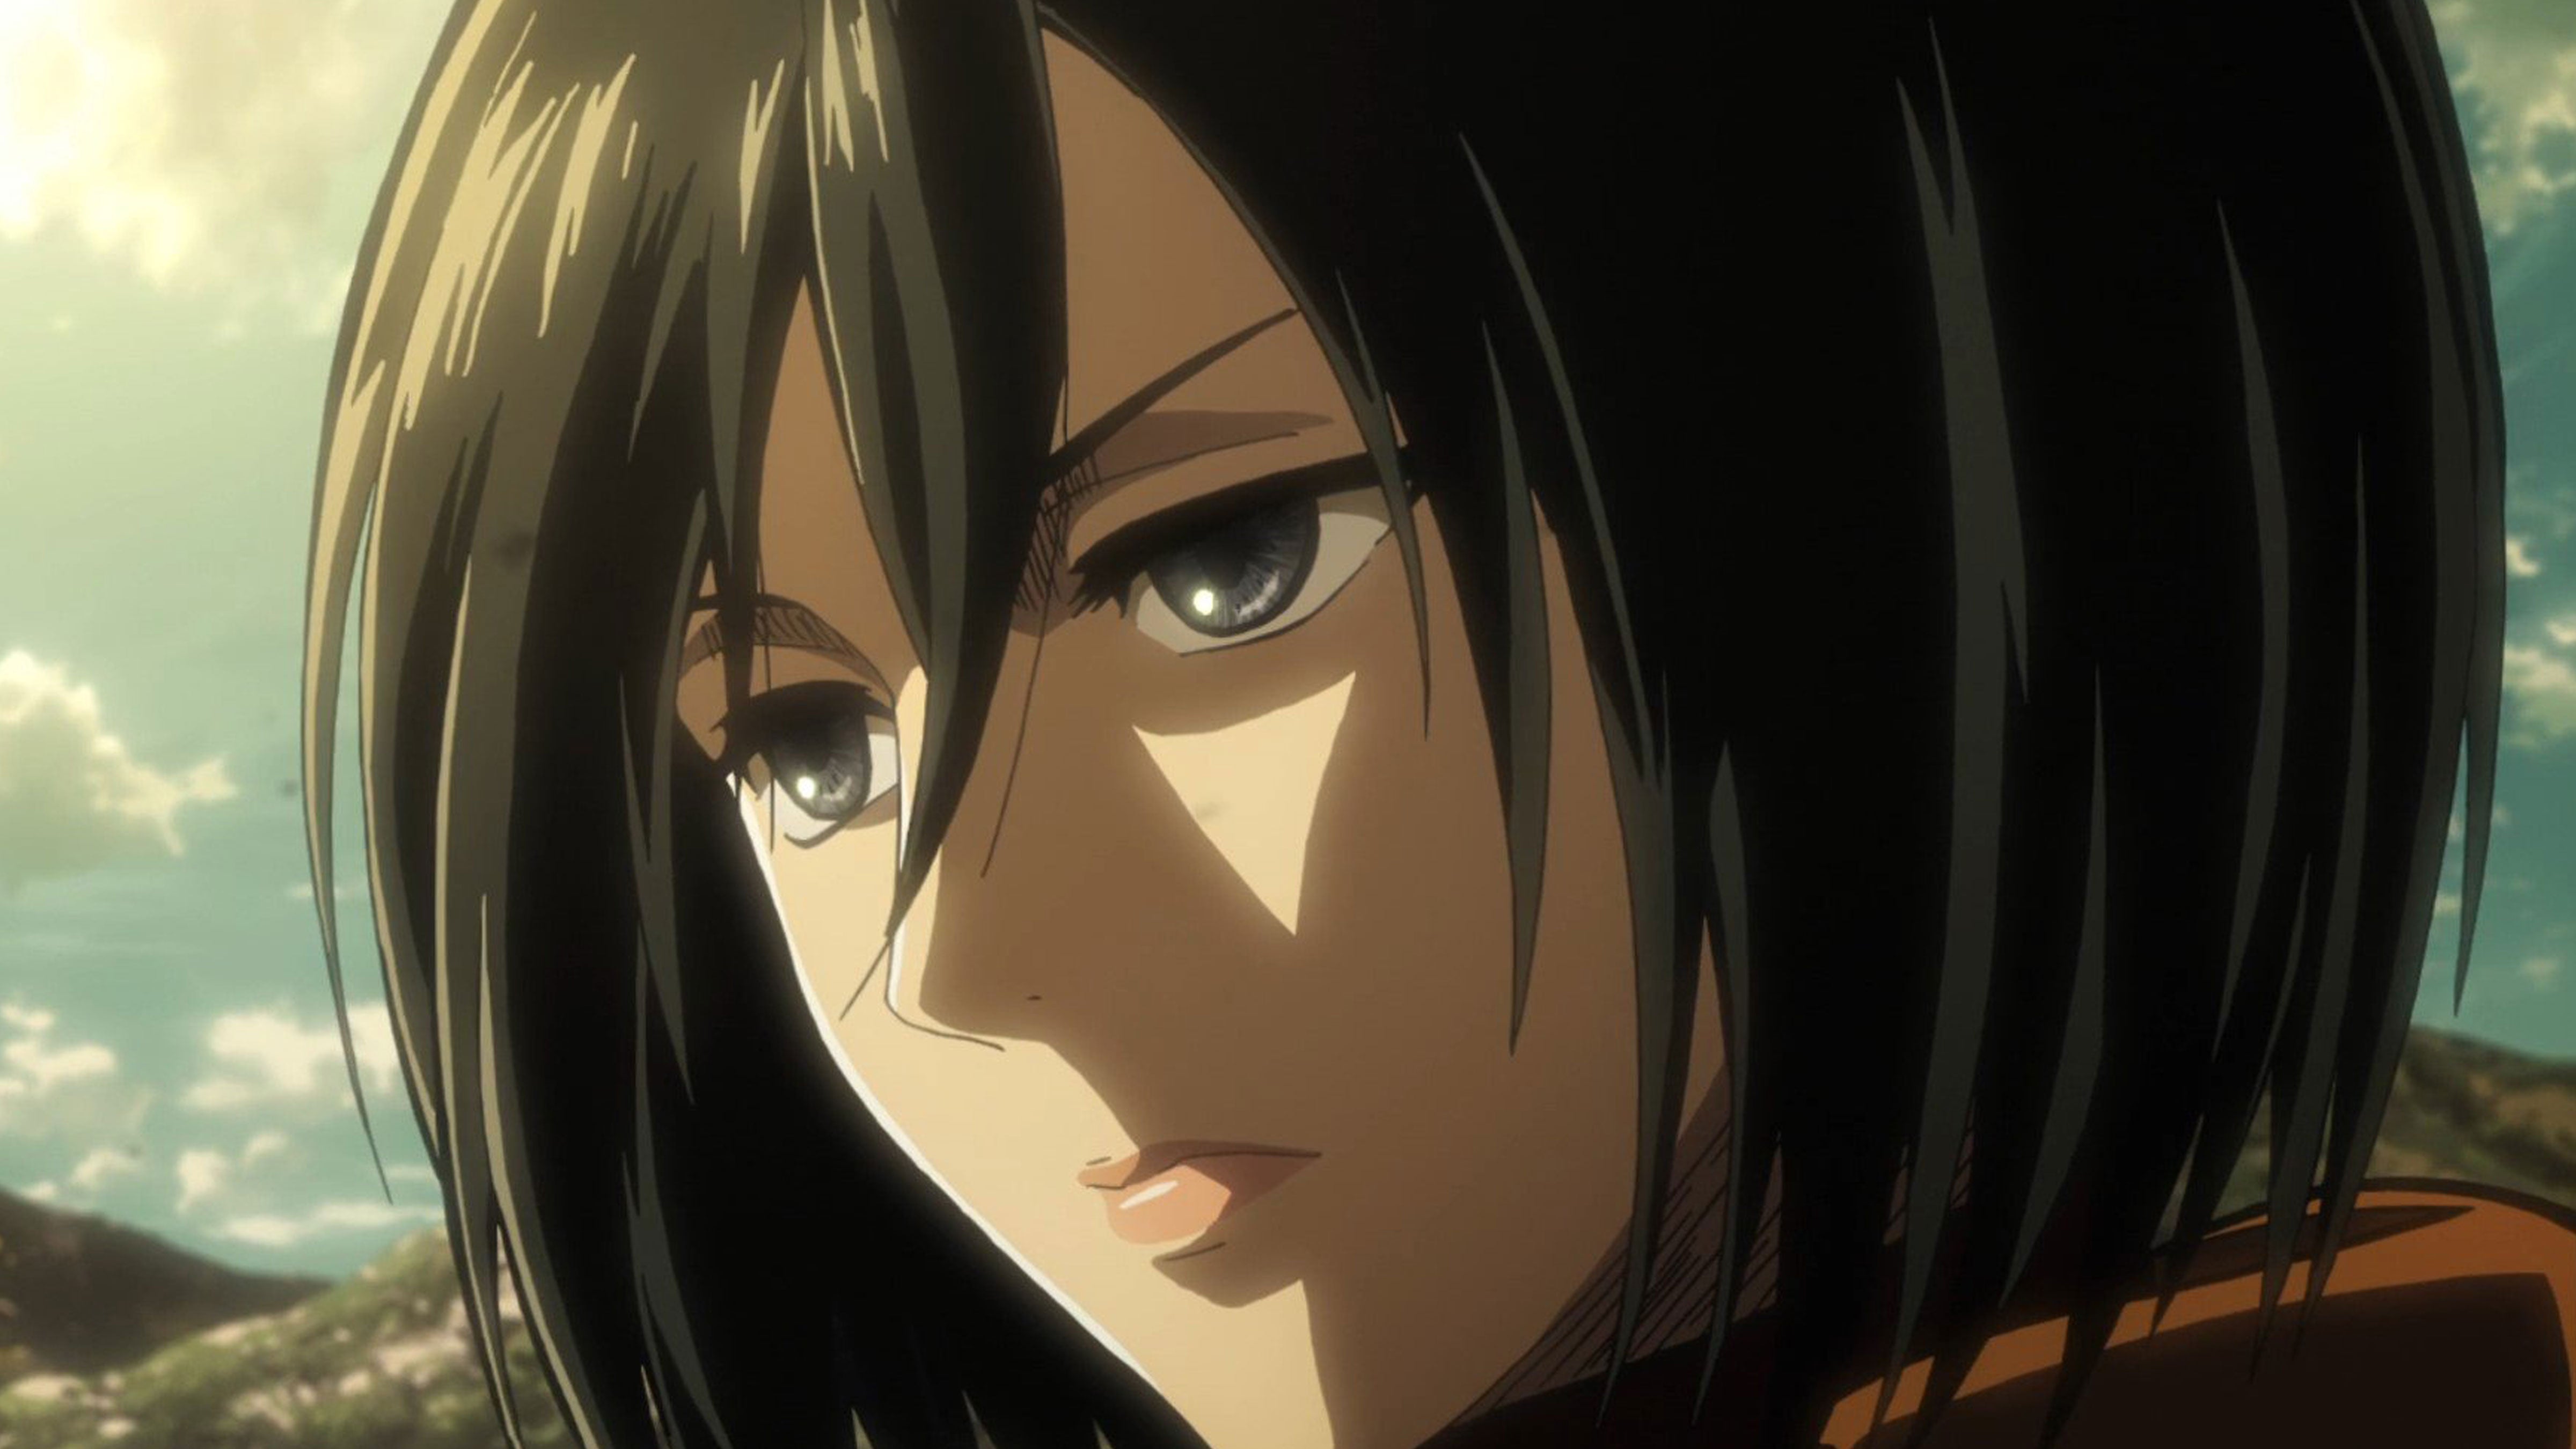 Close-up image of Attack on Titan character Mikasa looking deep in thought.